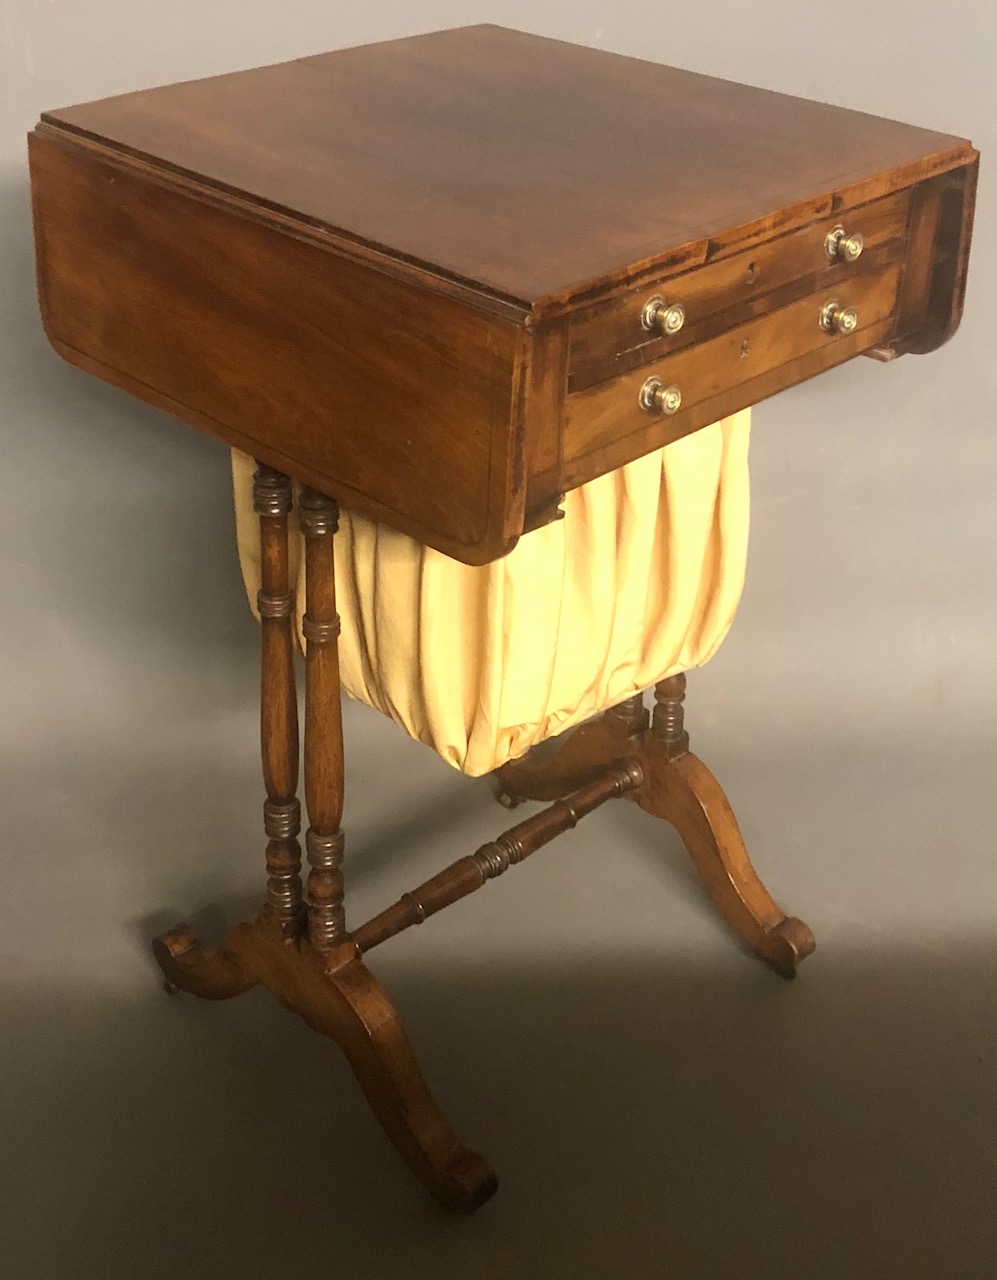 A 19TH CENTURY MAHOGANY WORK/SIDE TABLE With drop leaves above real and false drawers and fabric - Image 2 of 2